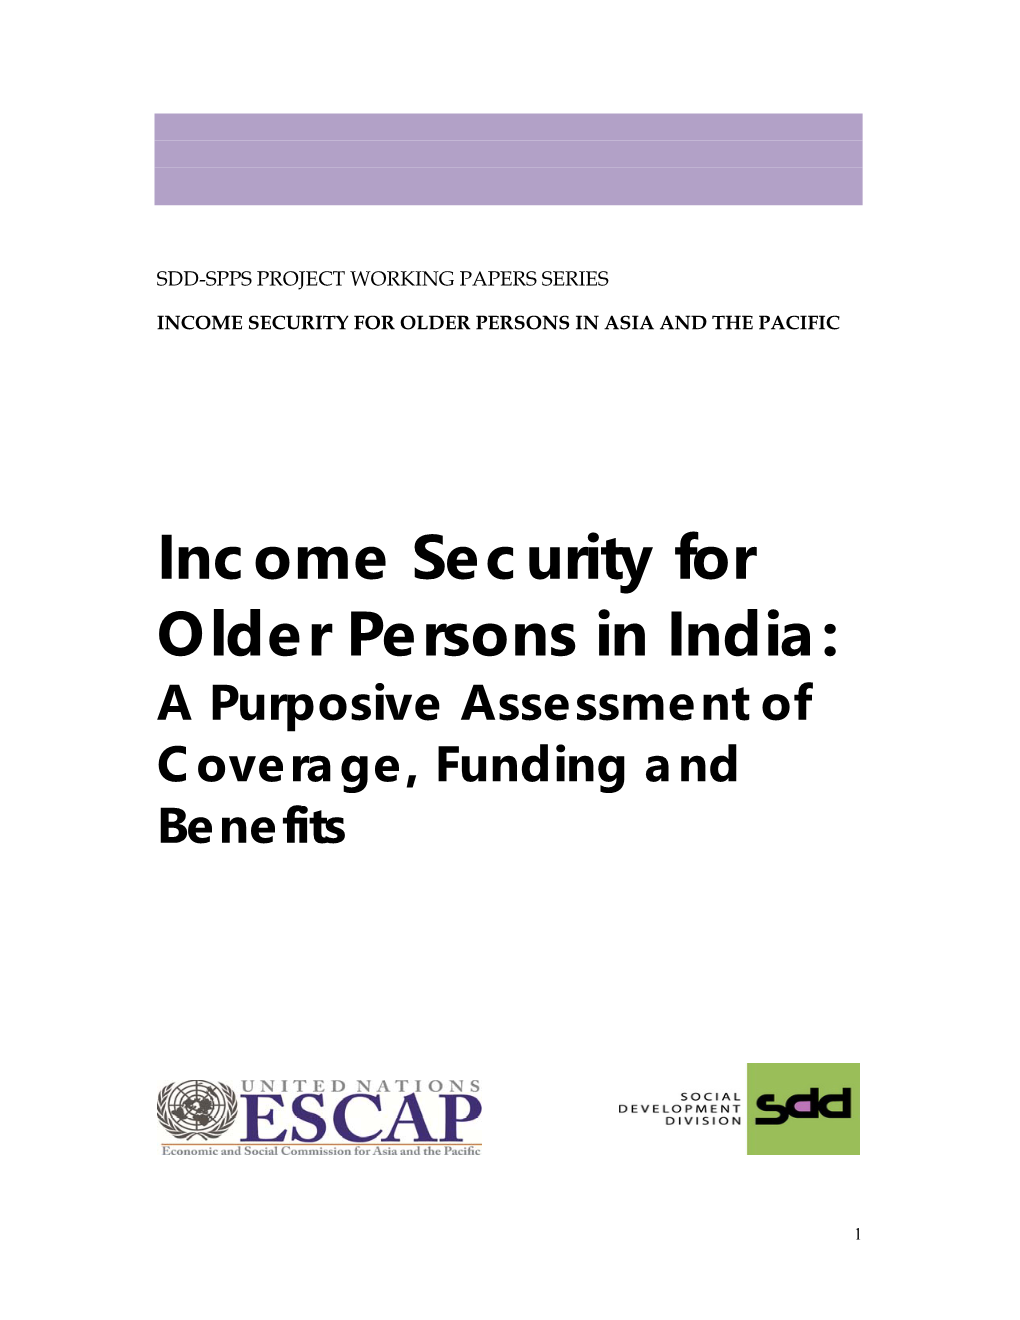 Income Security for Older Persons in India: a Purposive Assessment of Coverage, Funding and Benefits